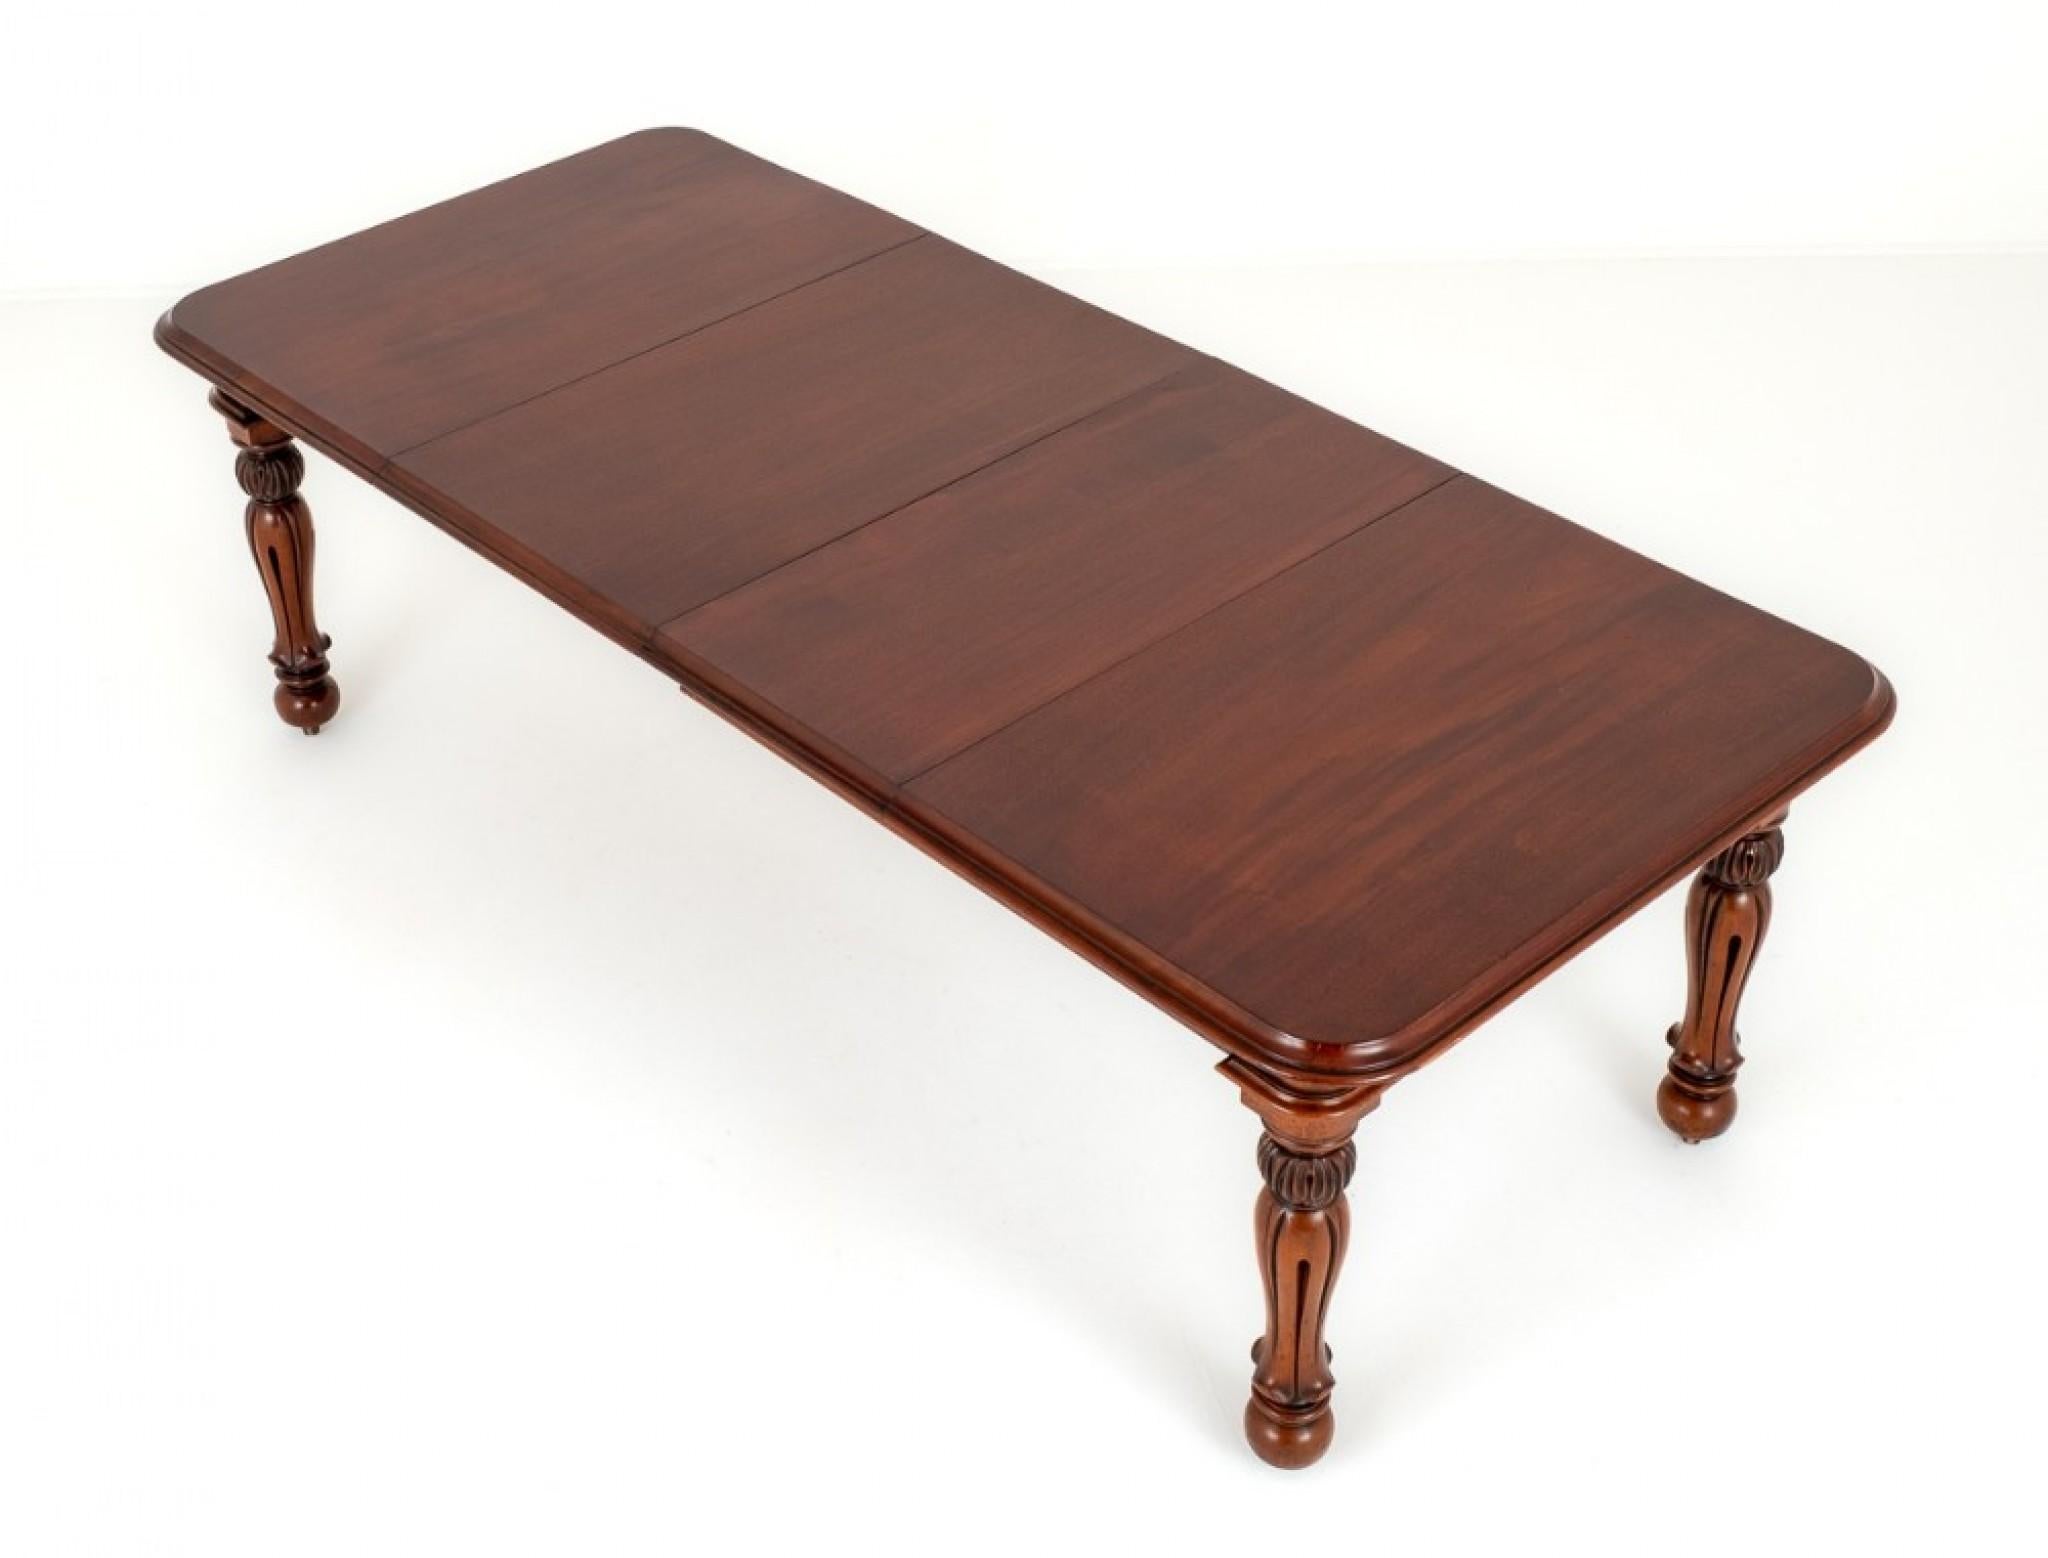 Early Victorian Mahogany 2 Leaf Extending Dining Table.
An extending dining table is a versatile piece of furniture
designed to accommodate varying numbers of people during mealtime or other gatherings.
This type of table features a mechanism that